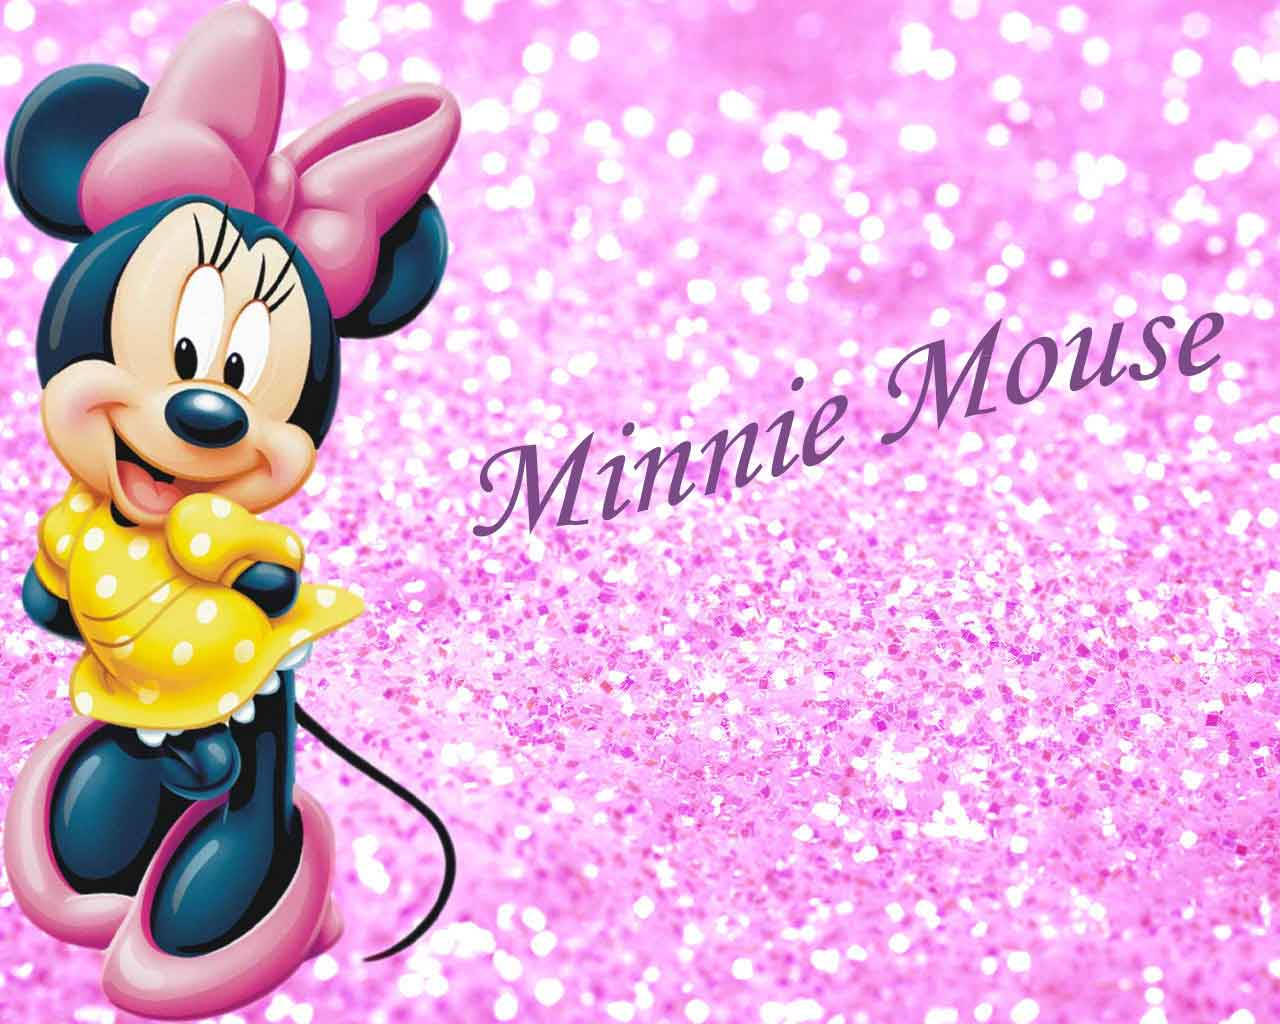 Minnie Mouse On Glitter Background Wallpaper